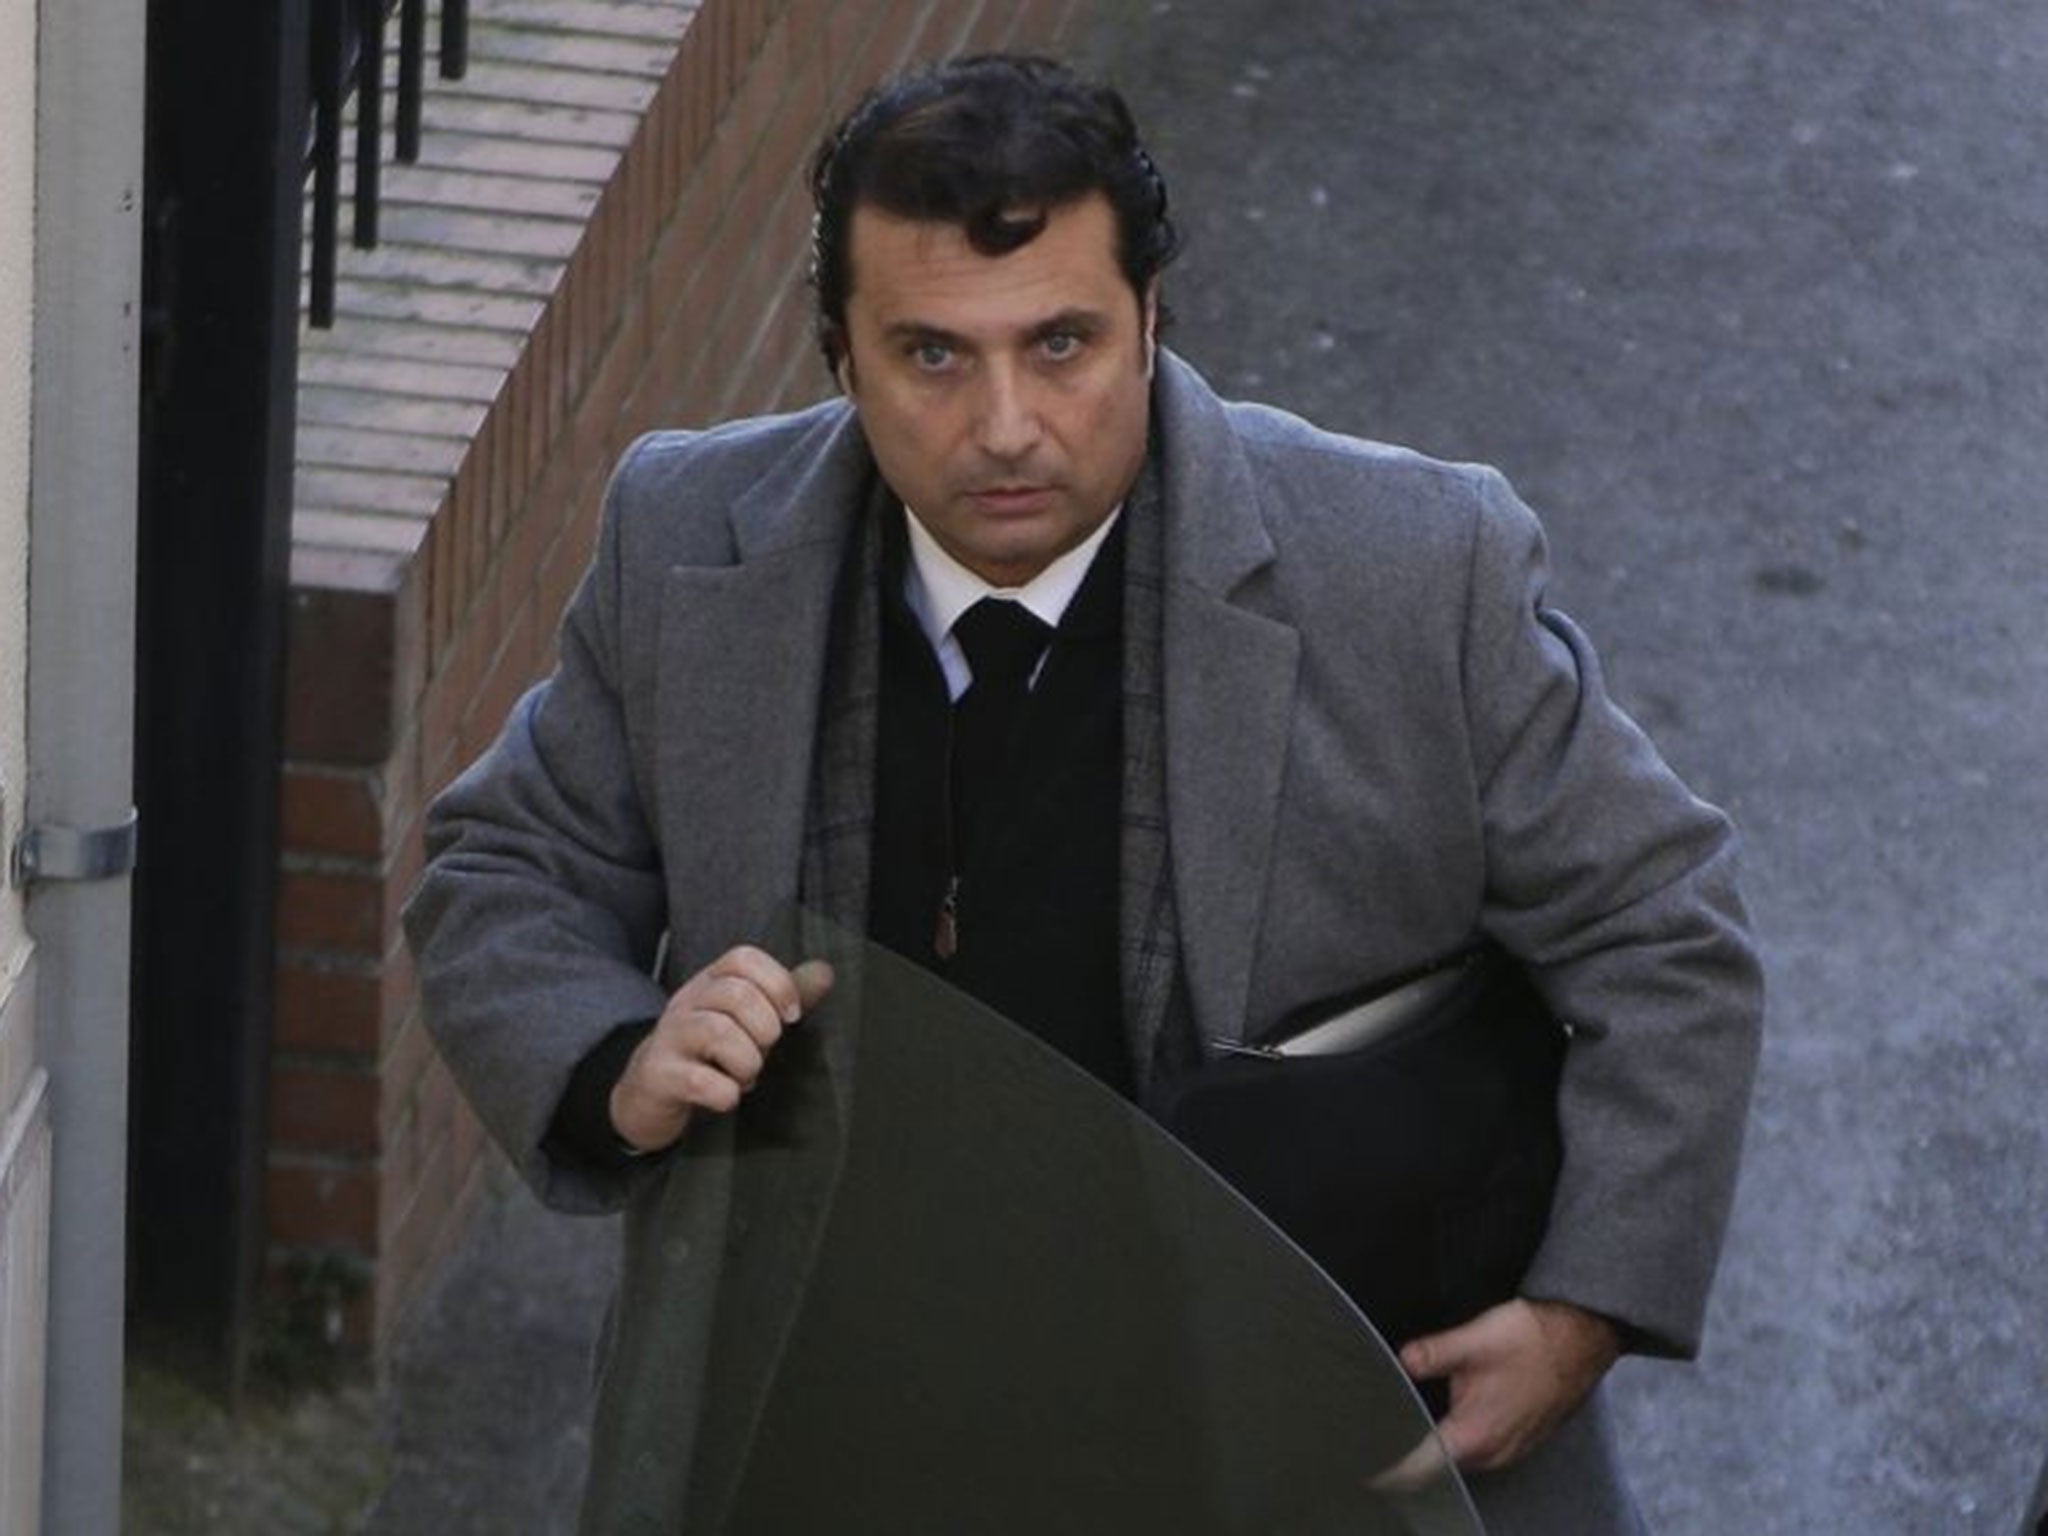 Captain of the Costa Concordia cruise liner Francesco Schettino arrives for his trial in Grosseto today